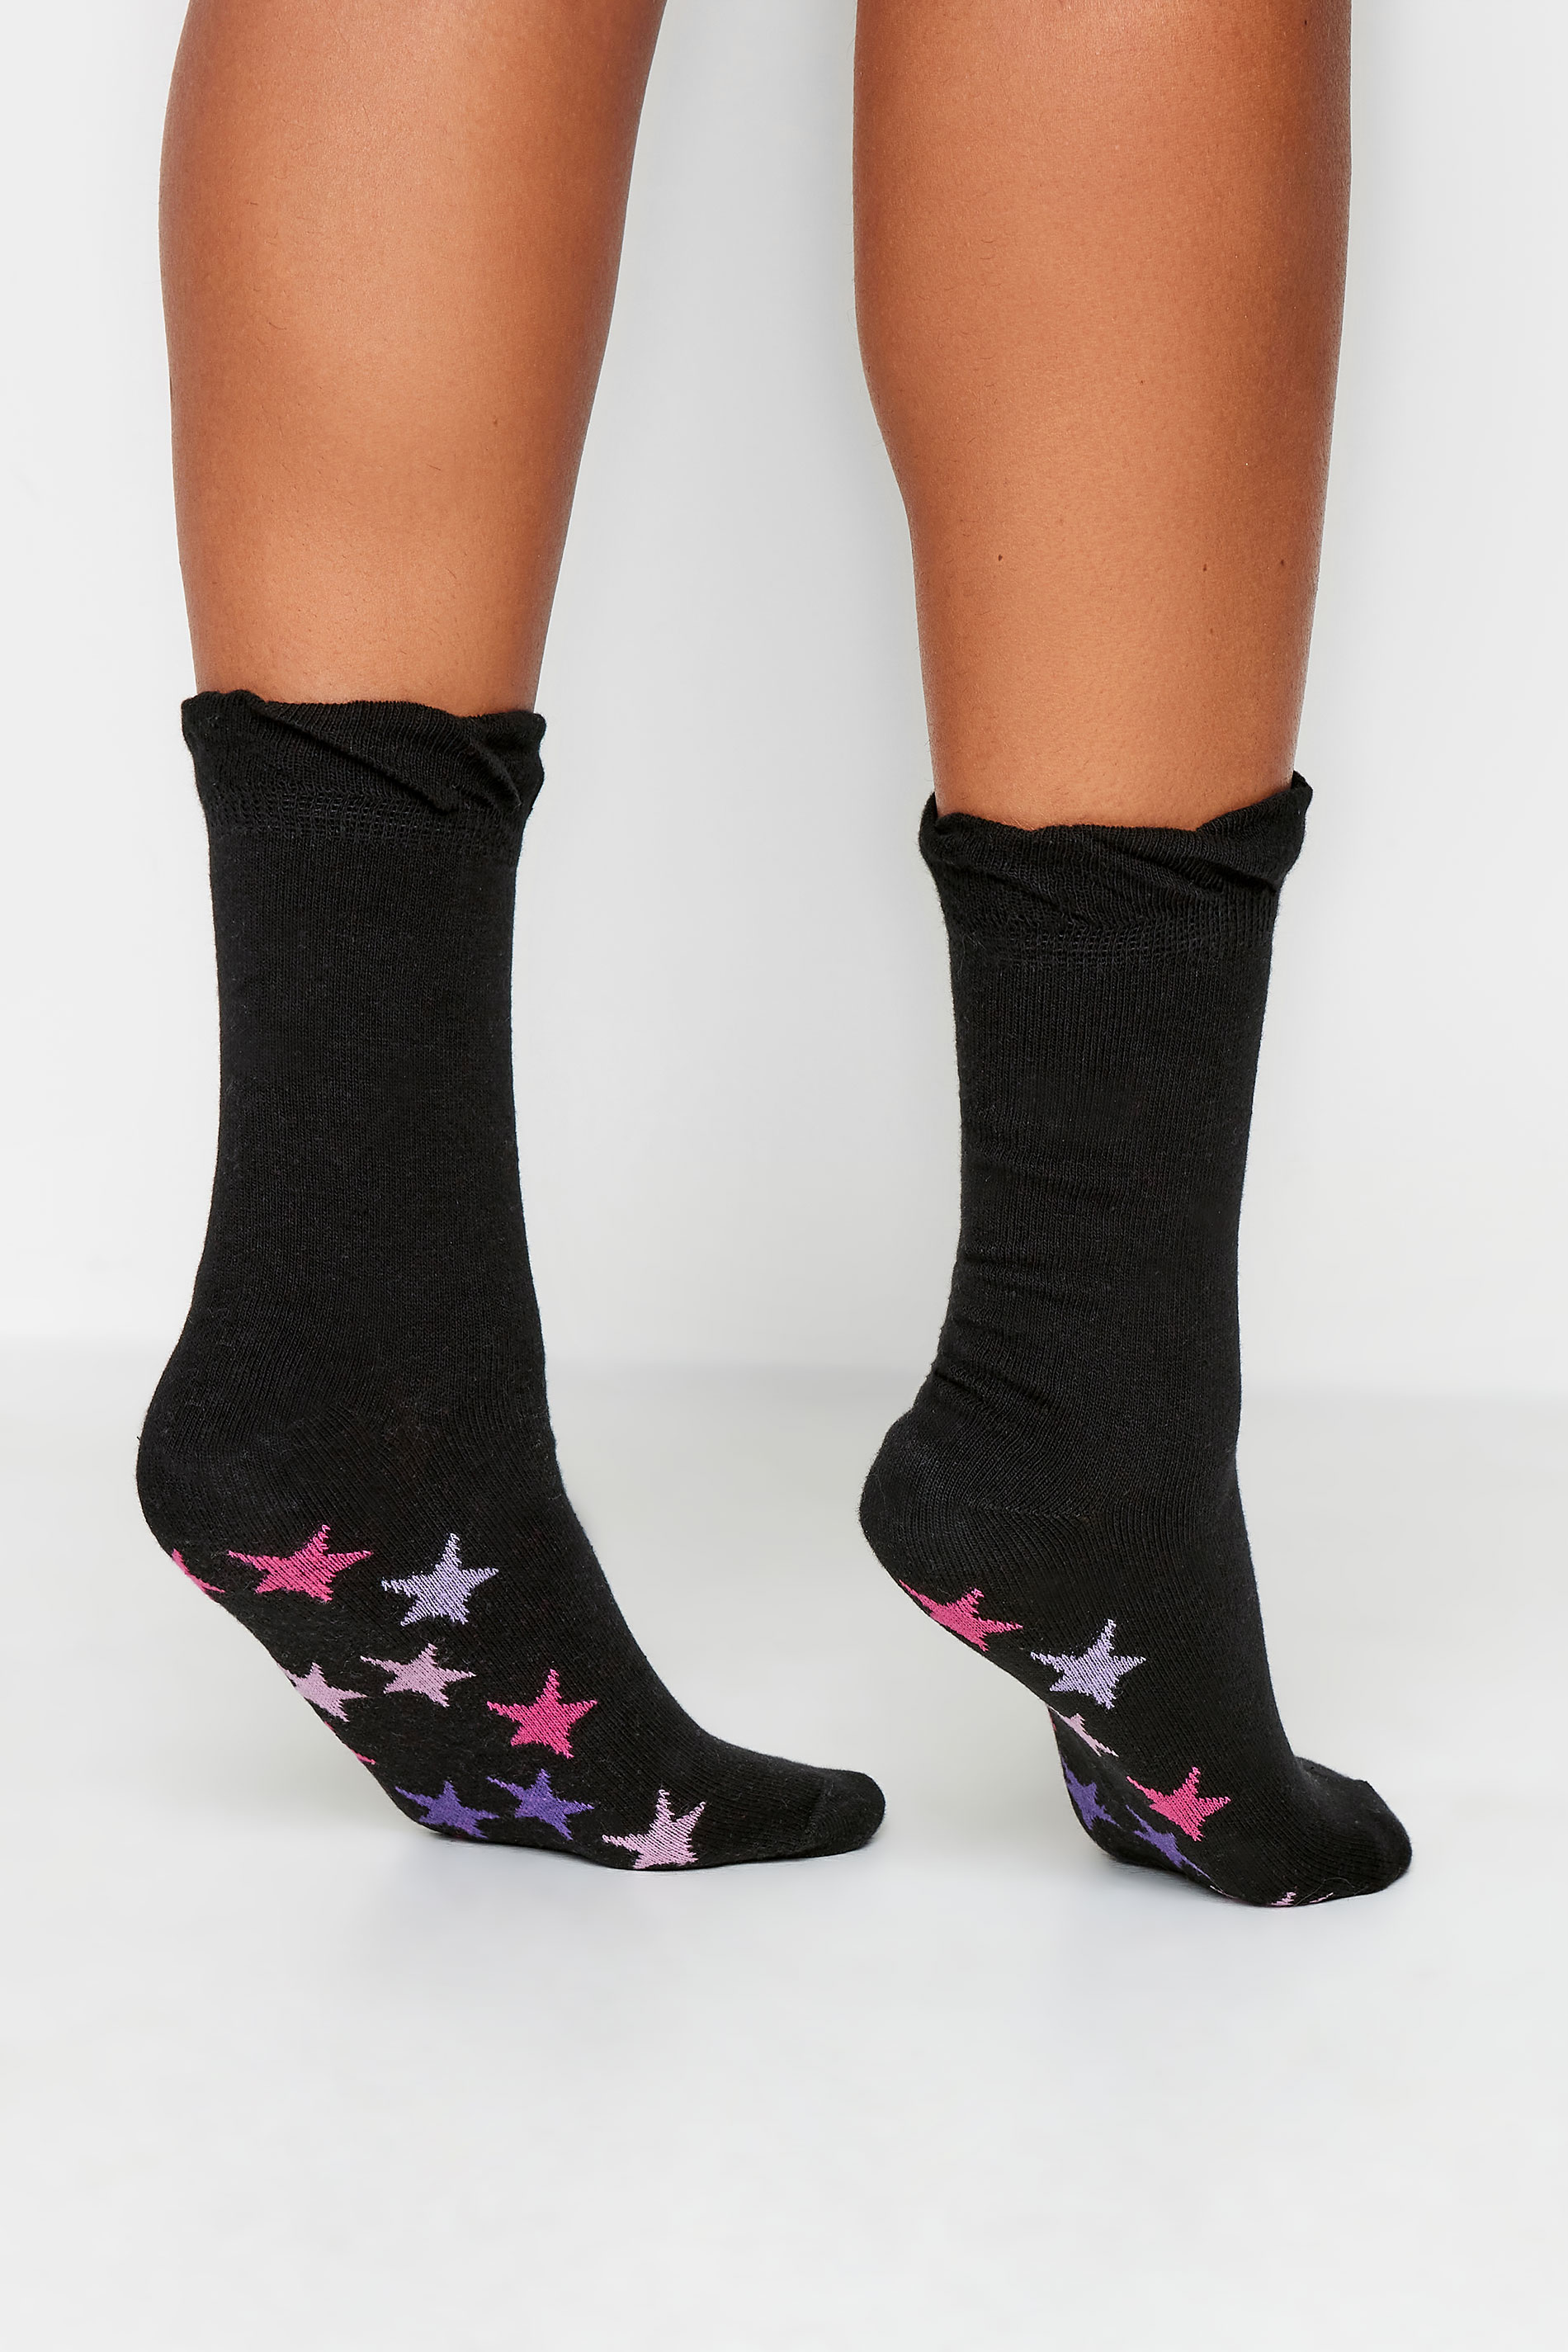 YOURS 4 PACK Black Star & Heart Print Footbed Socks | Yours Clothing 2